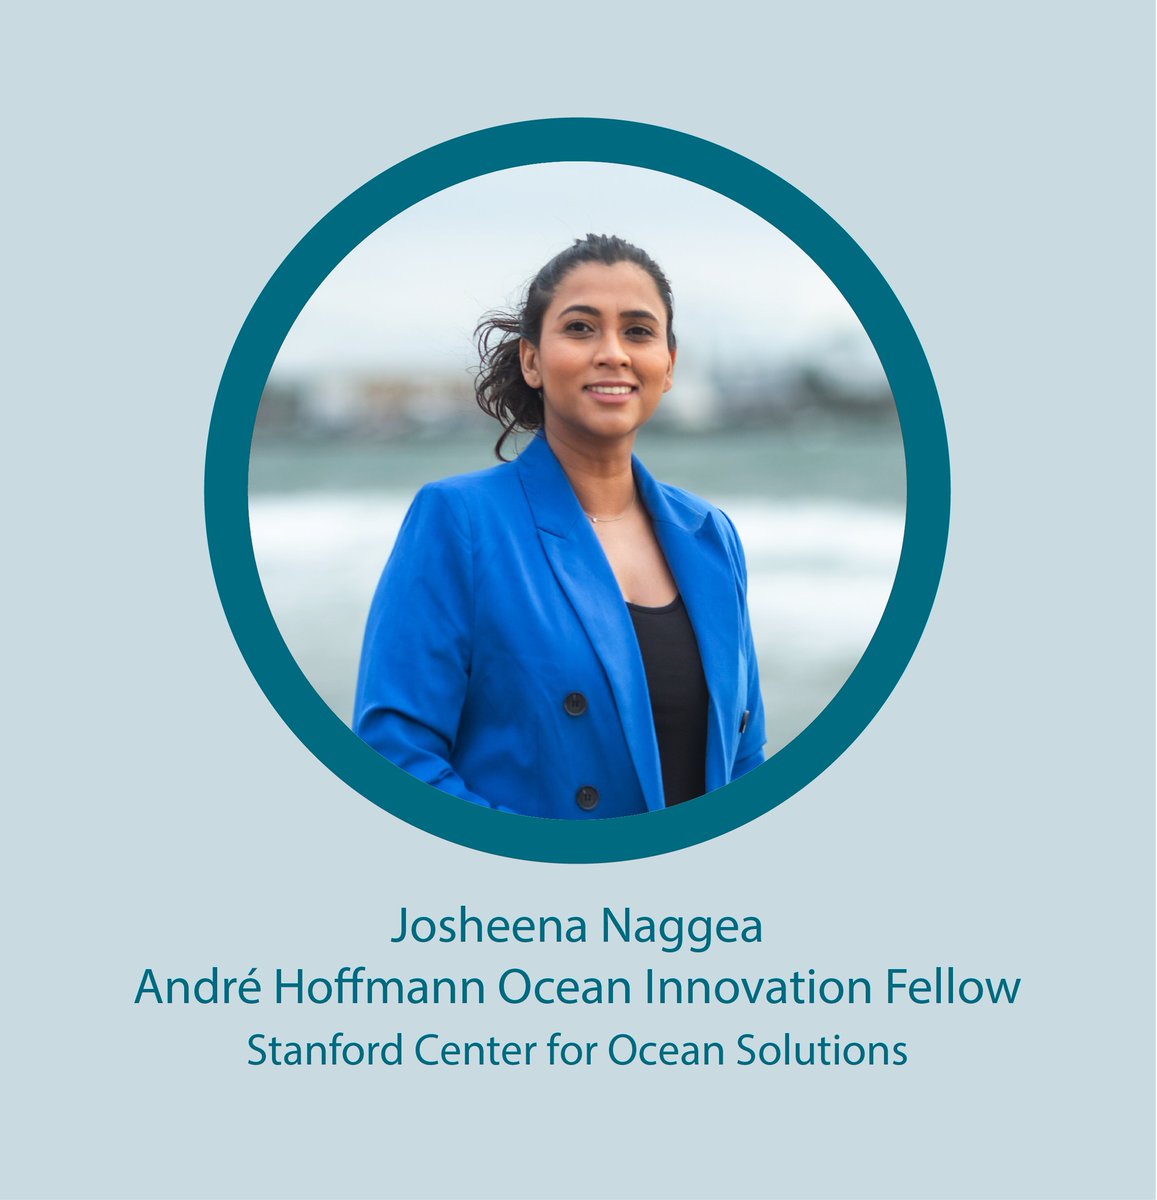 Mentorship and community engagement inspire @josheena_naggea in her work as an André Hoffmann Fellow @oceansolutions & @davos. 'Sometimes we overlook how much connection to a place centers us.' Read her story ➡️ oceansolutions.stanford.edu/spotlight-conn…